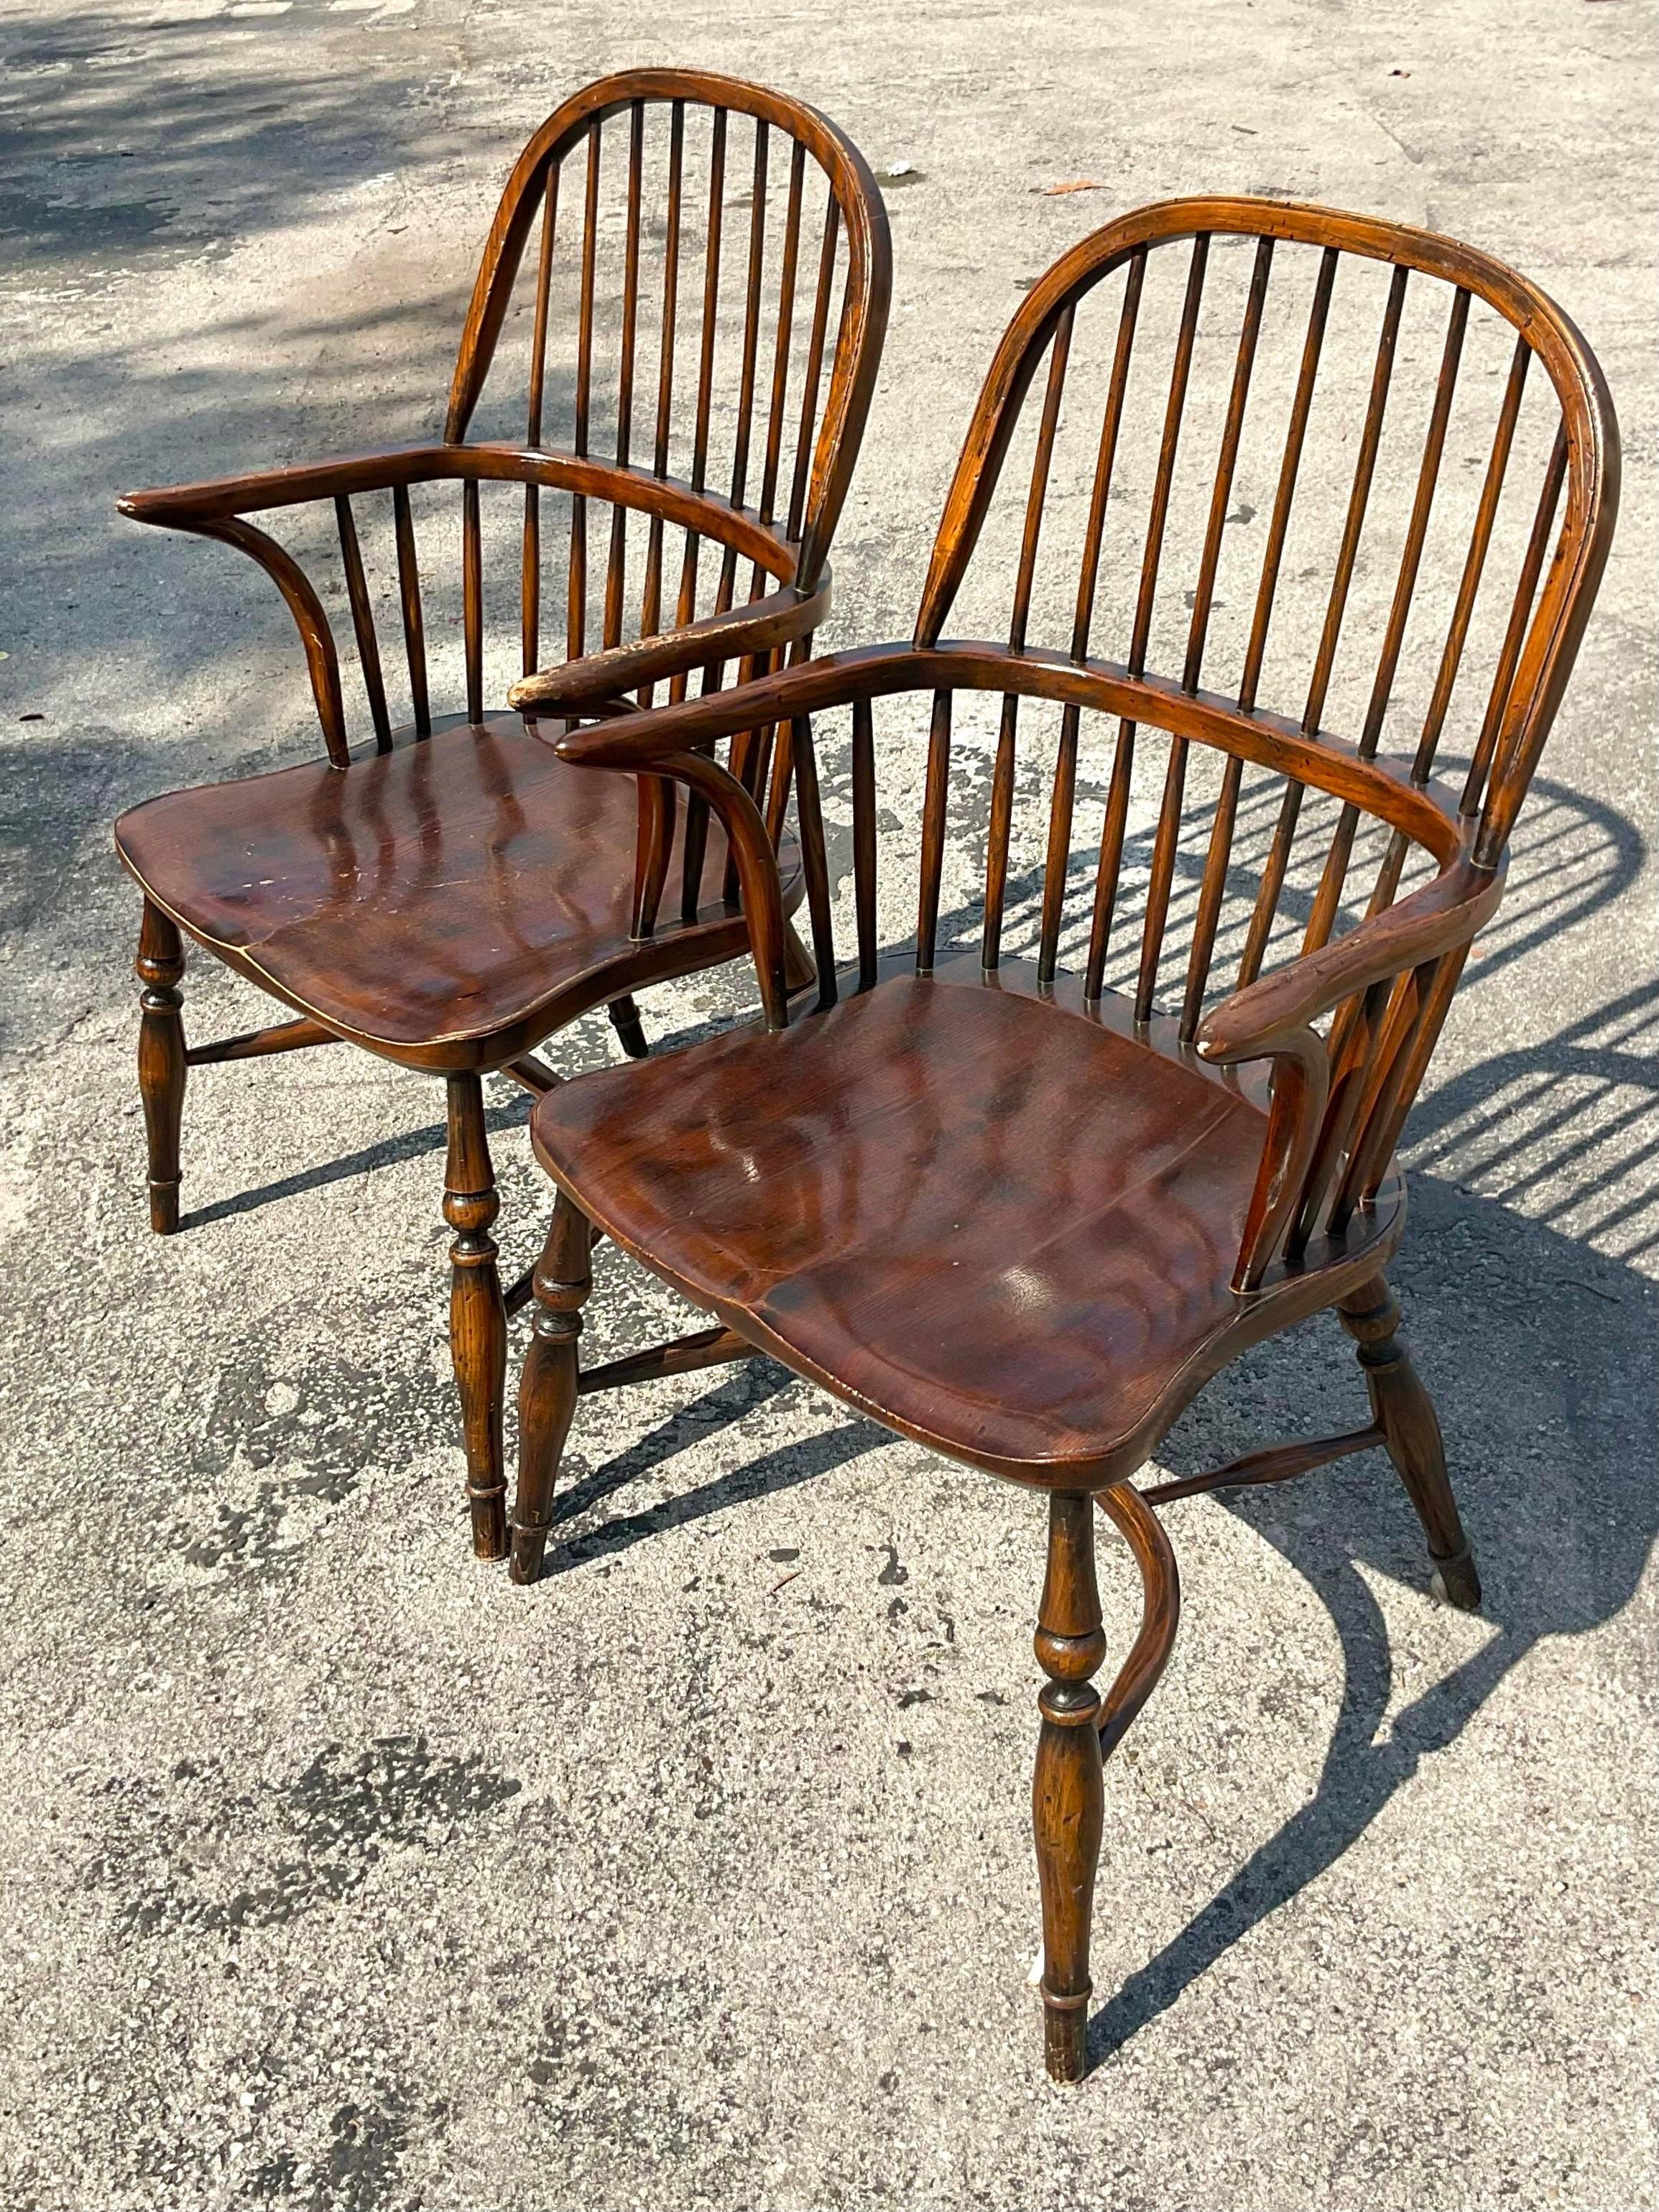 A fabulous pair of vintage boho arm chairs. A chic high back Windsor style with beautiful wood grain detail. Acquired from a Palm Beach estate.